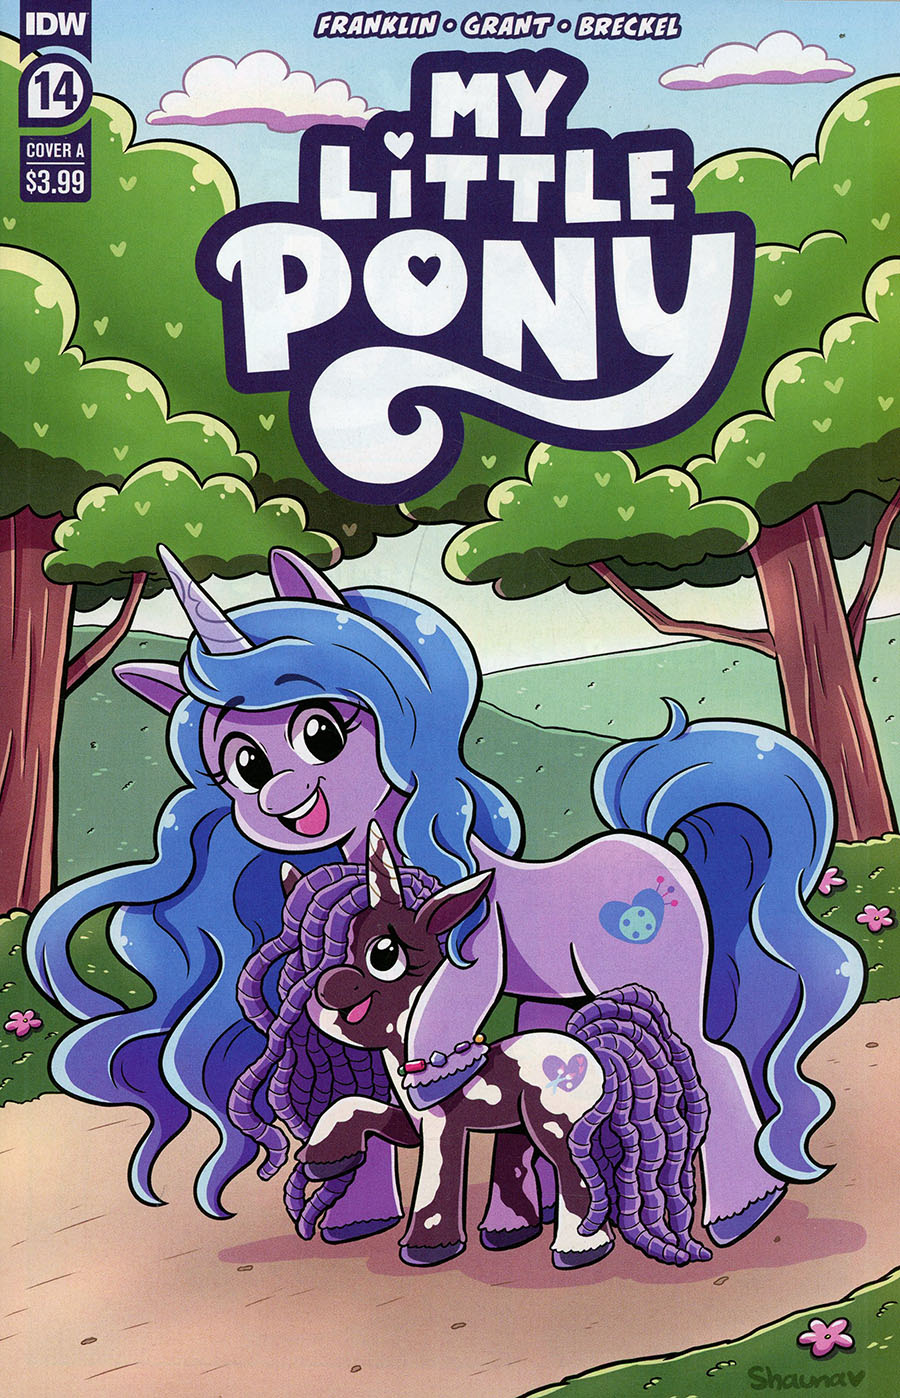 My Little Pony #14 Cover A Regular Shauna Grant Cover